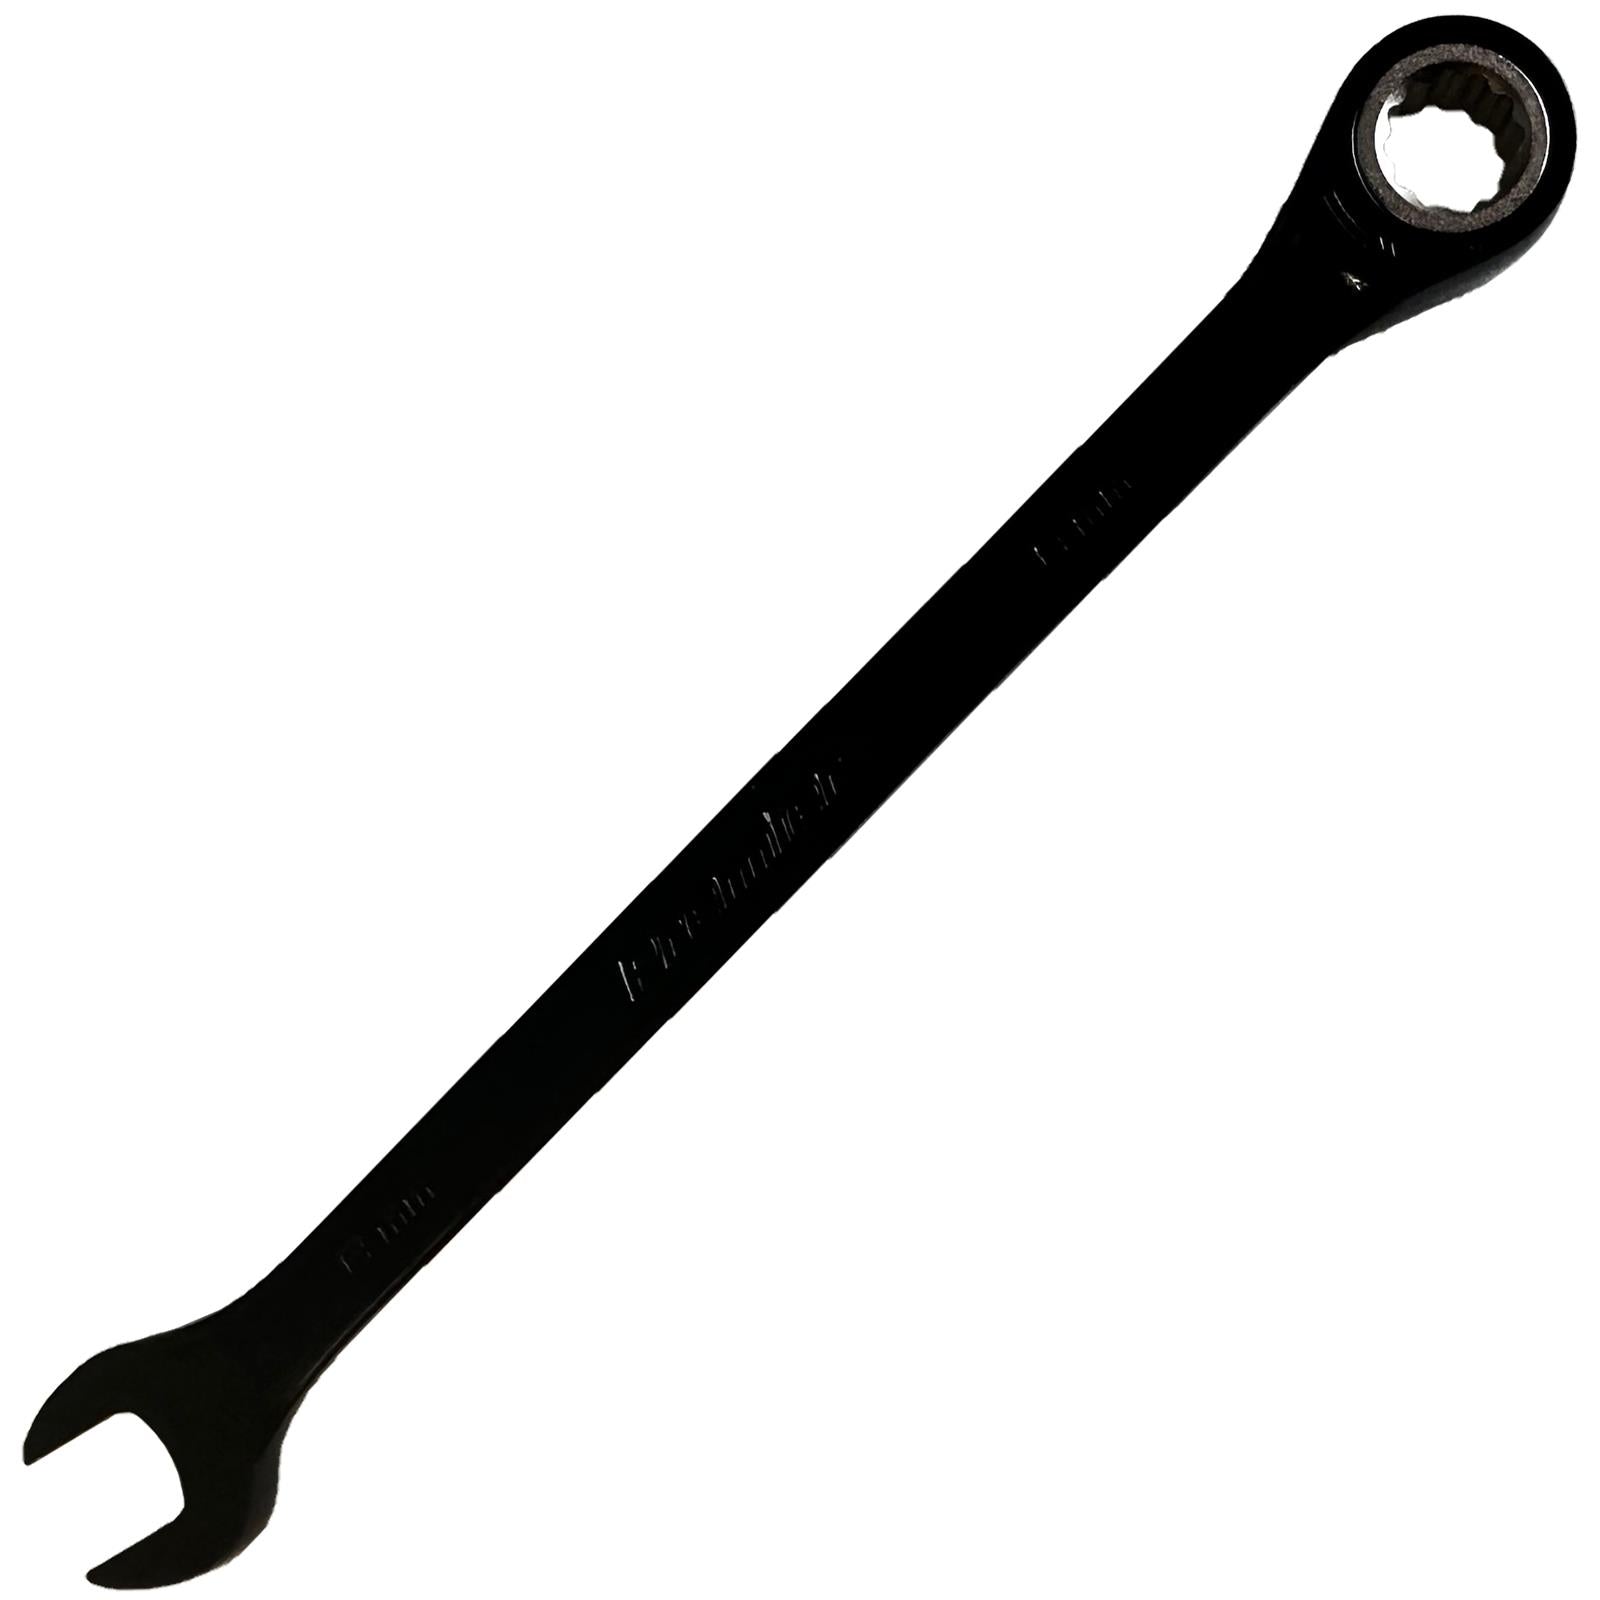 Sealey Combination Ratchet Spanner 8mm Black Series Wrench Garage